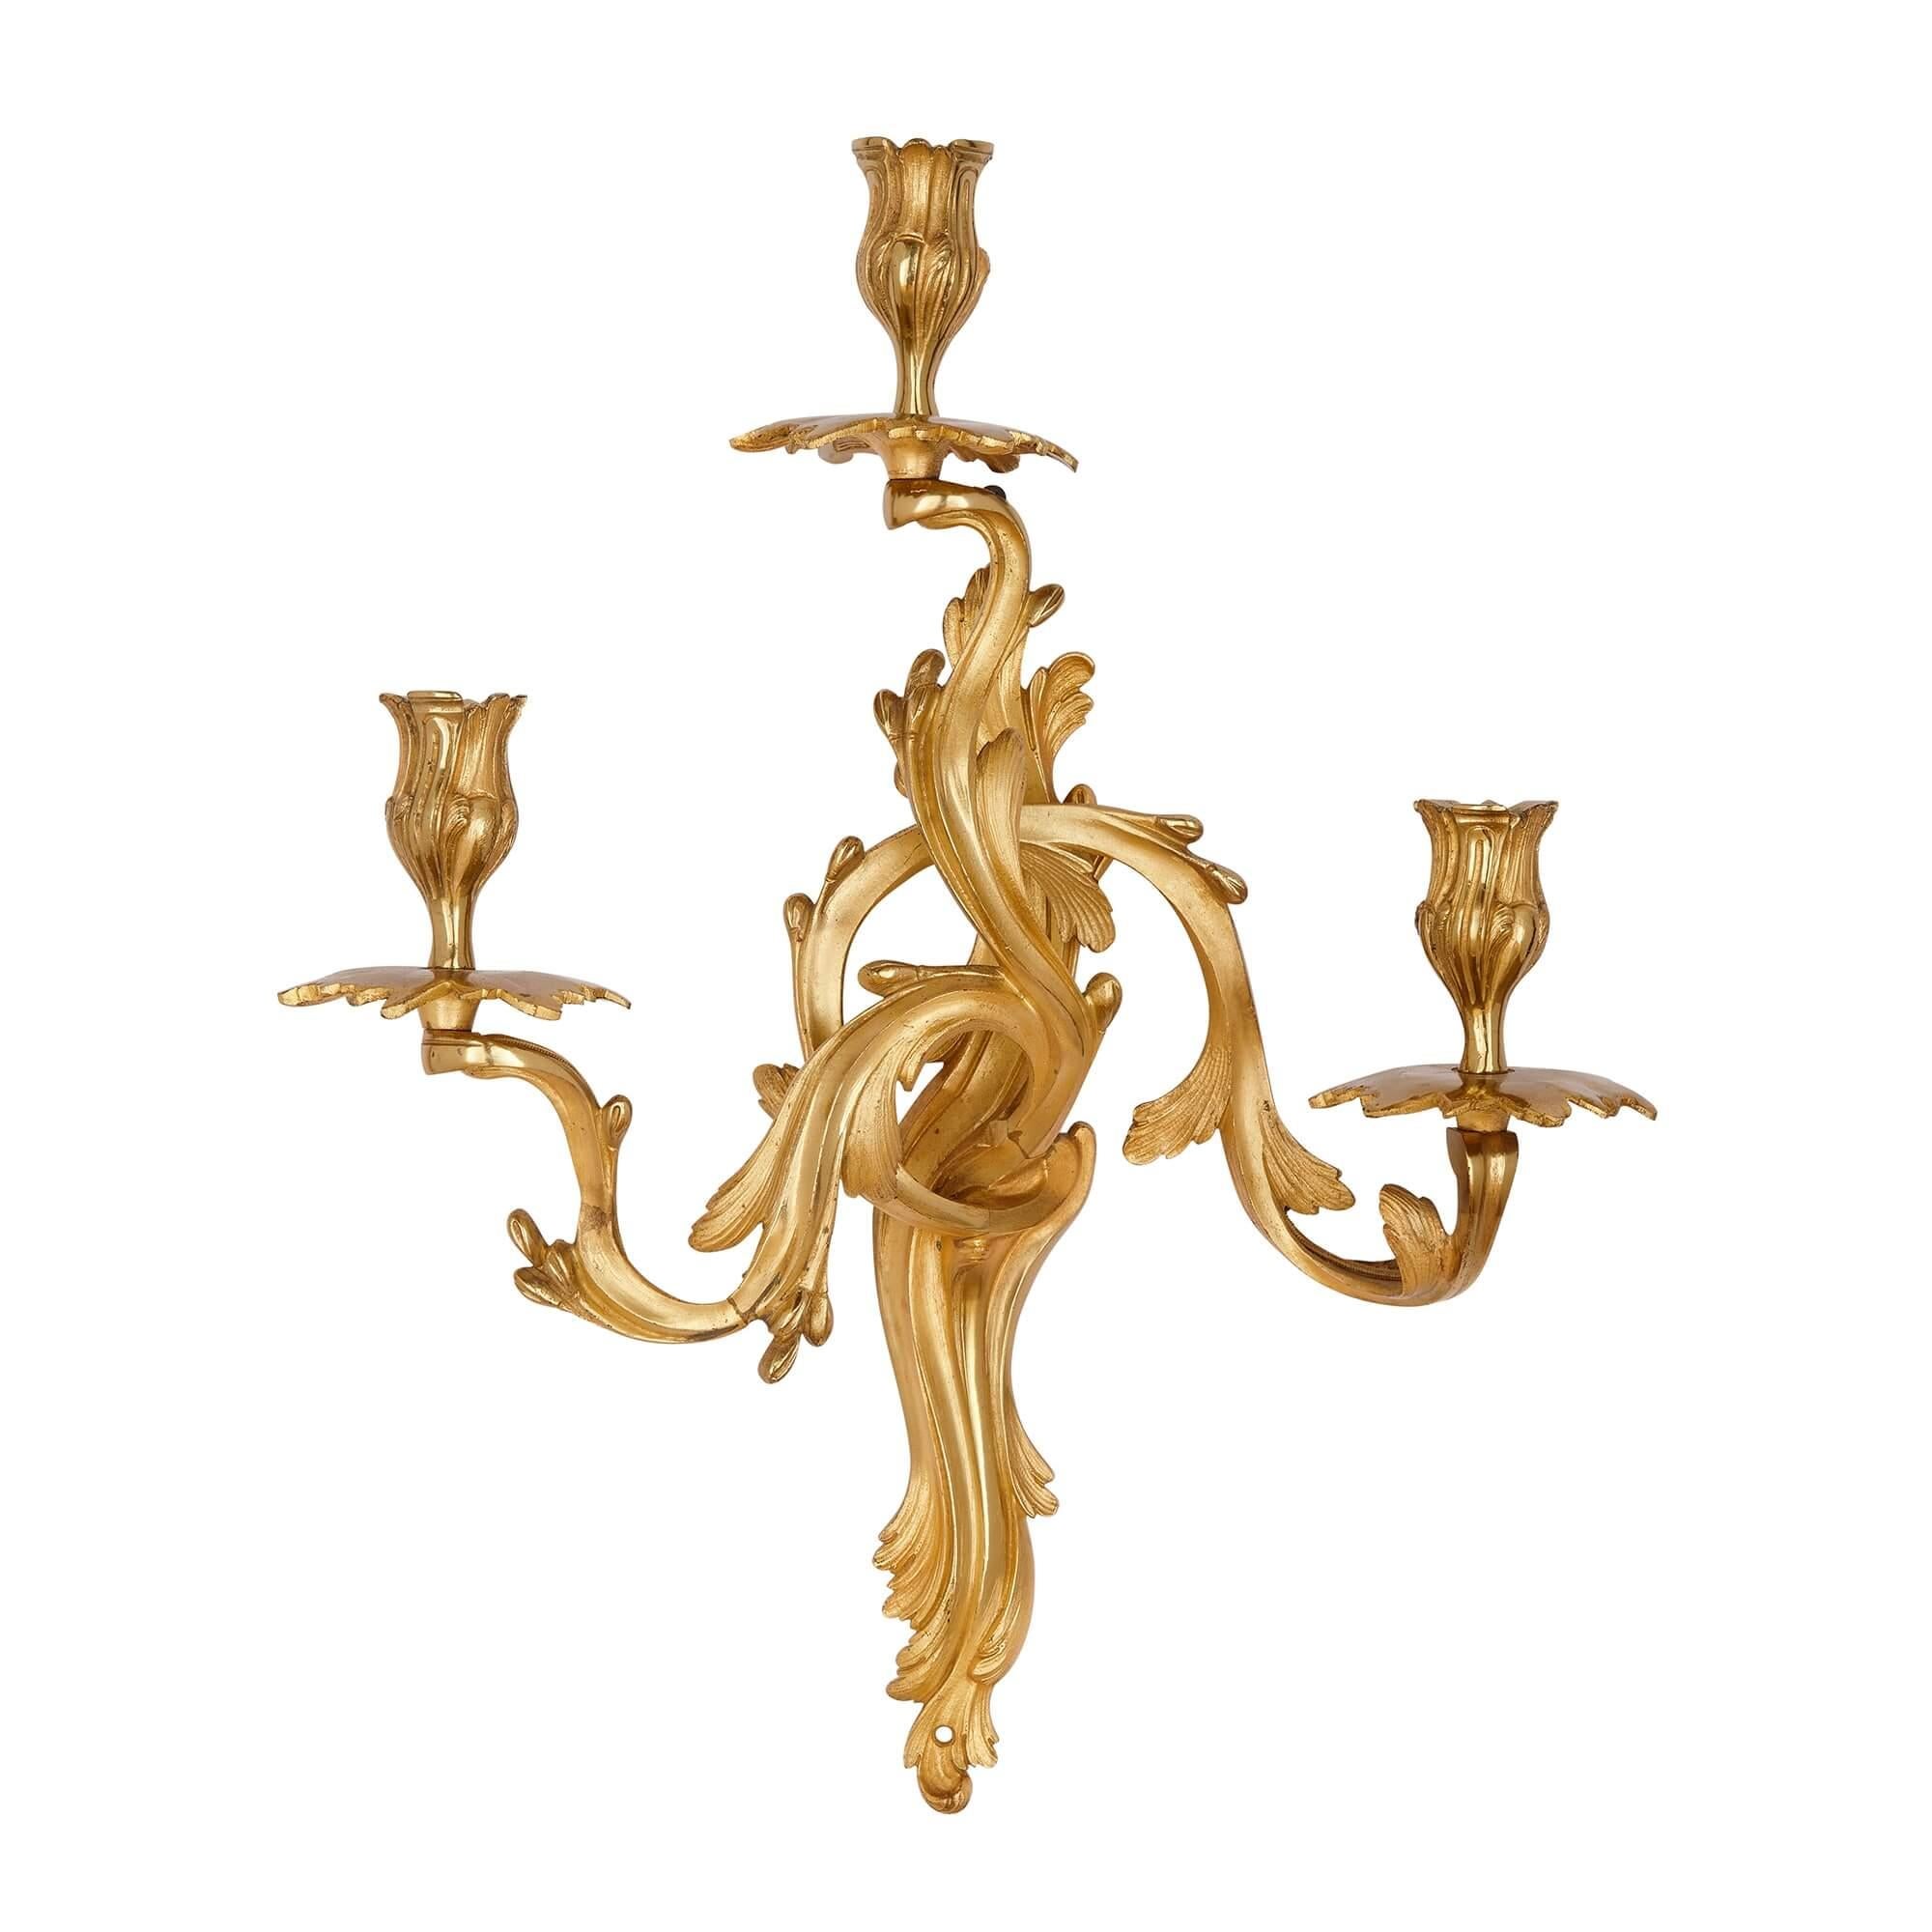 Pair of French Ormolu wall lights in the Louis XV style.
French, Late 19th century.
Measures: height 45cm, width 40cm, depth 15cm.

Cast in gilt-bronze, and designed in an exuberant, radiant Louis XV style, with interweaving branches and a host